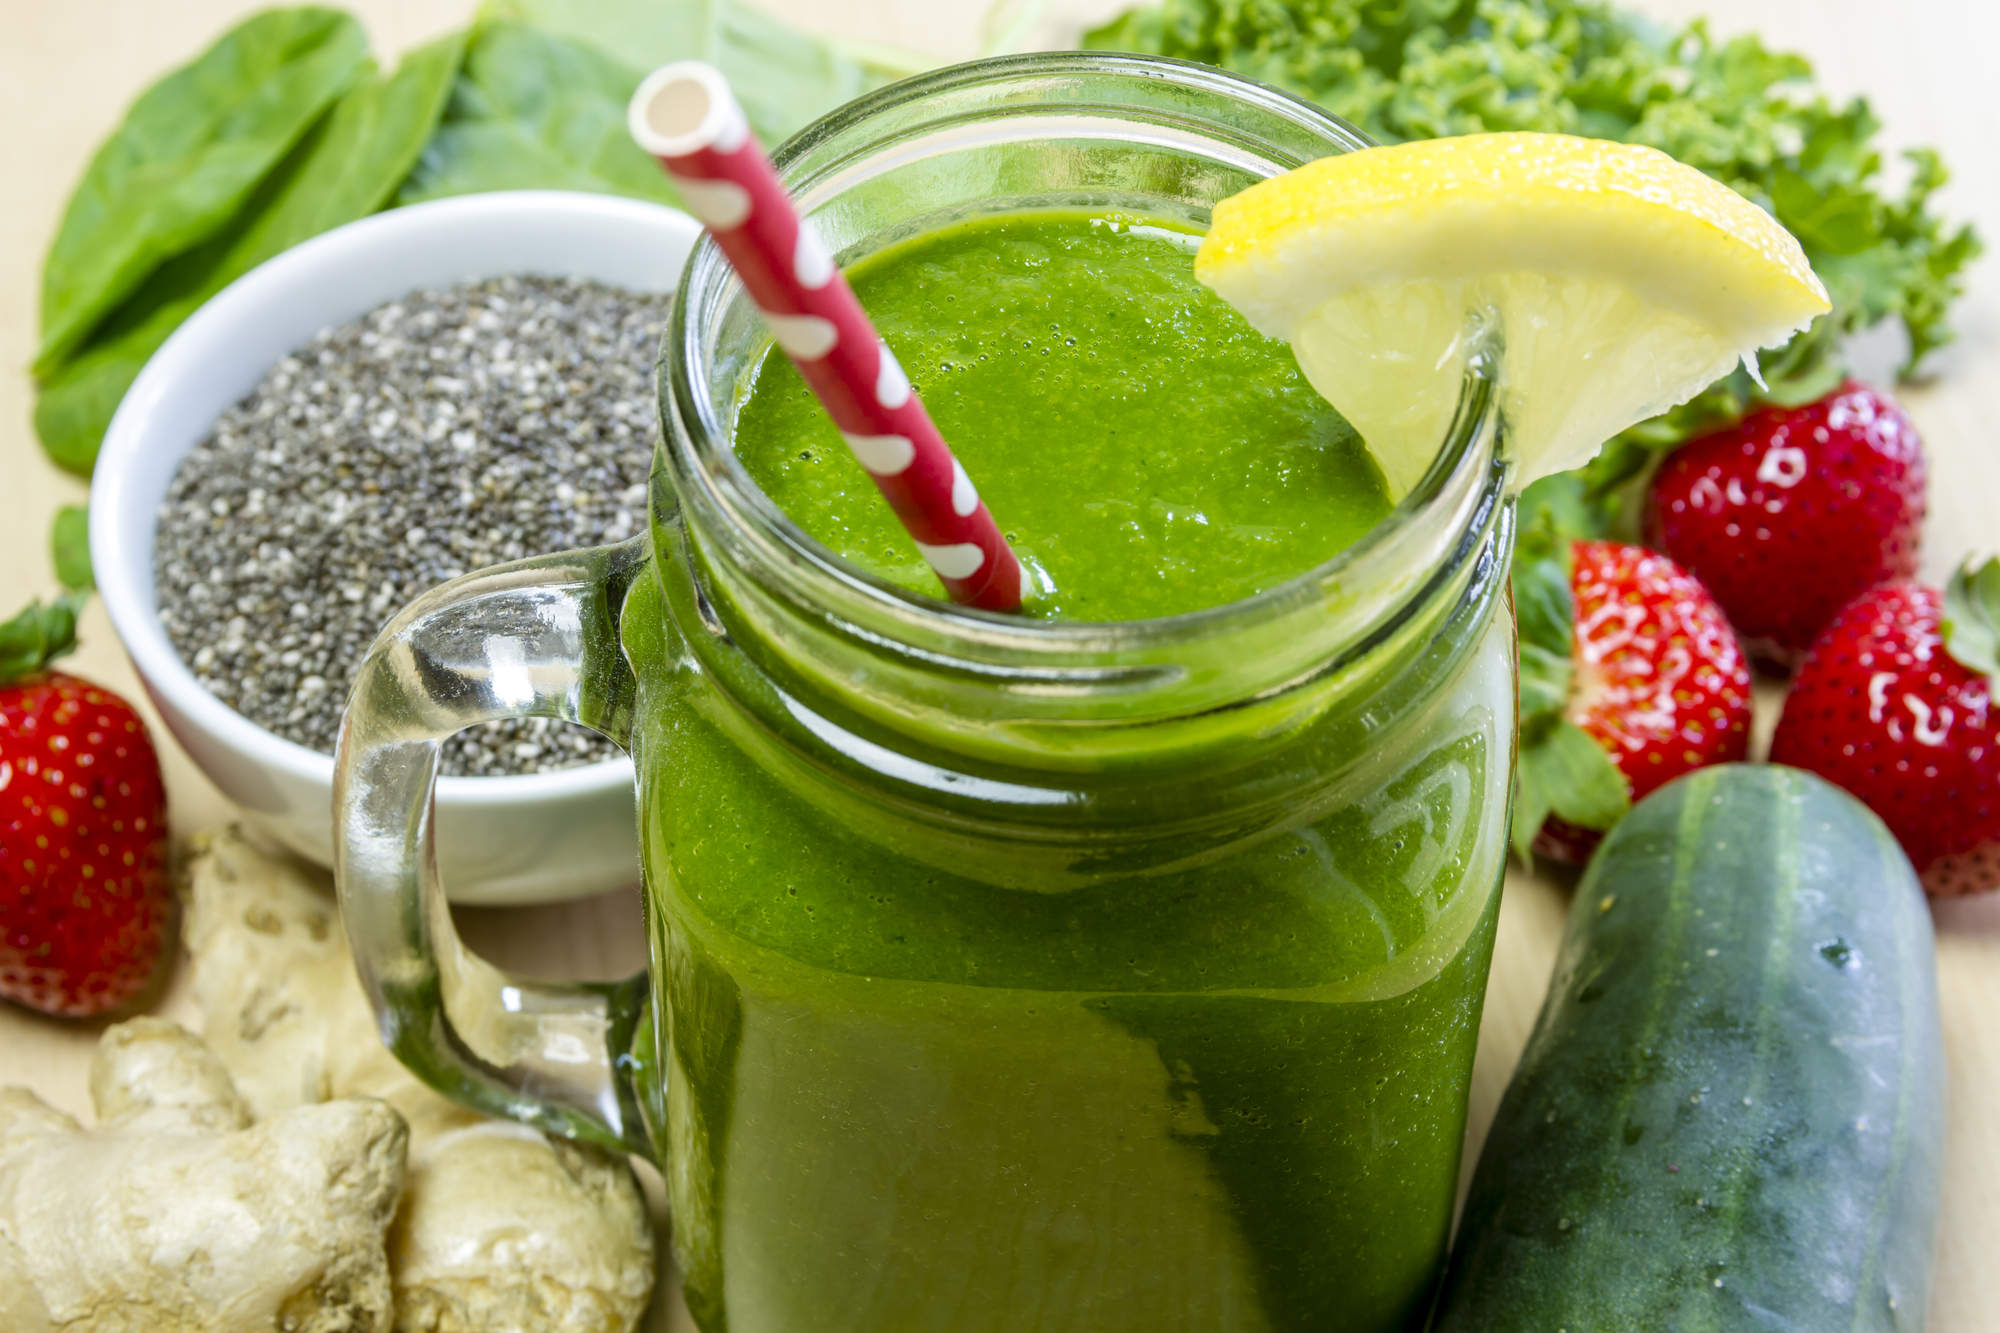 Lose weight without dieting: 5 reasons why it is easier with green smoothies